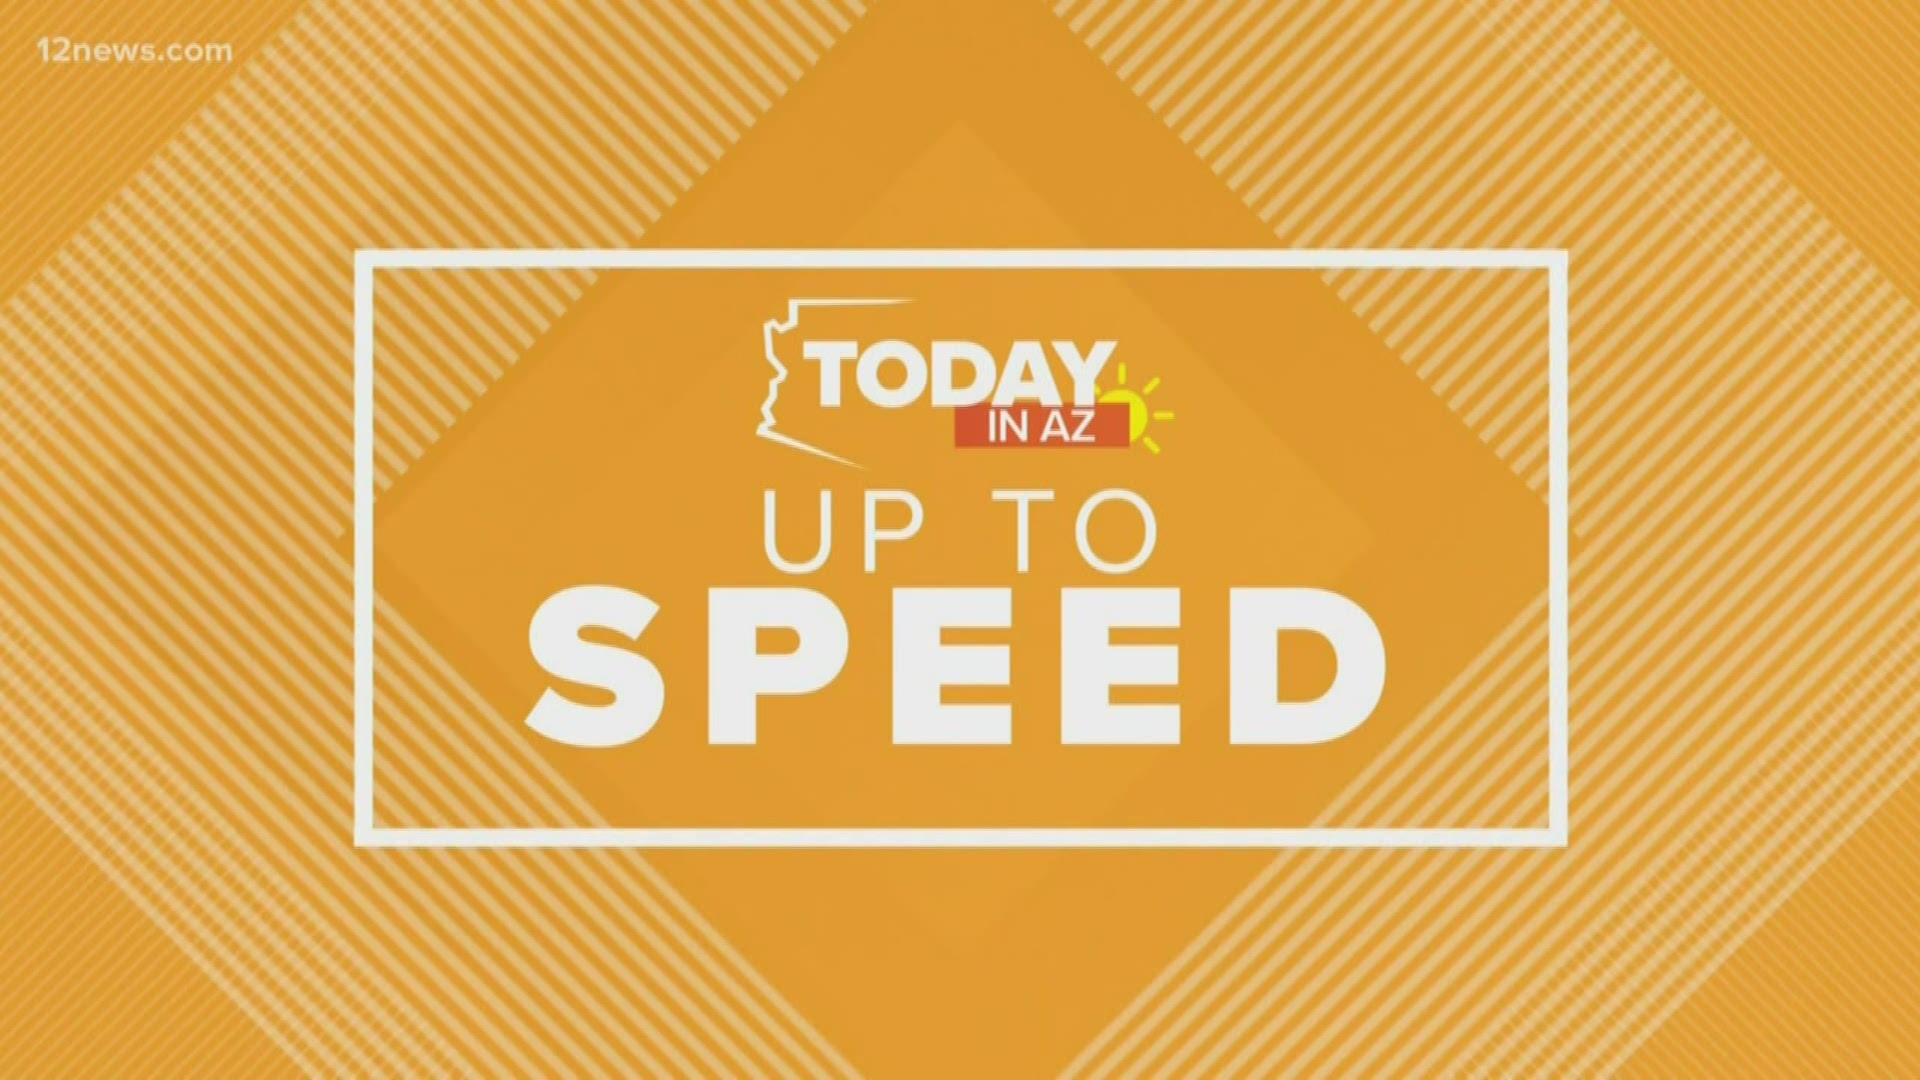 Get 'Up to Speed' on Thursday morning.